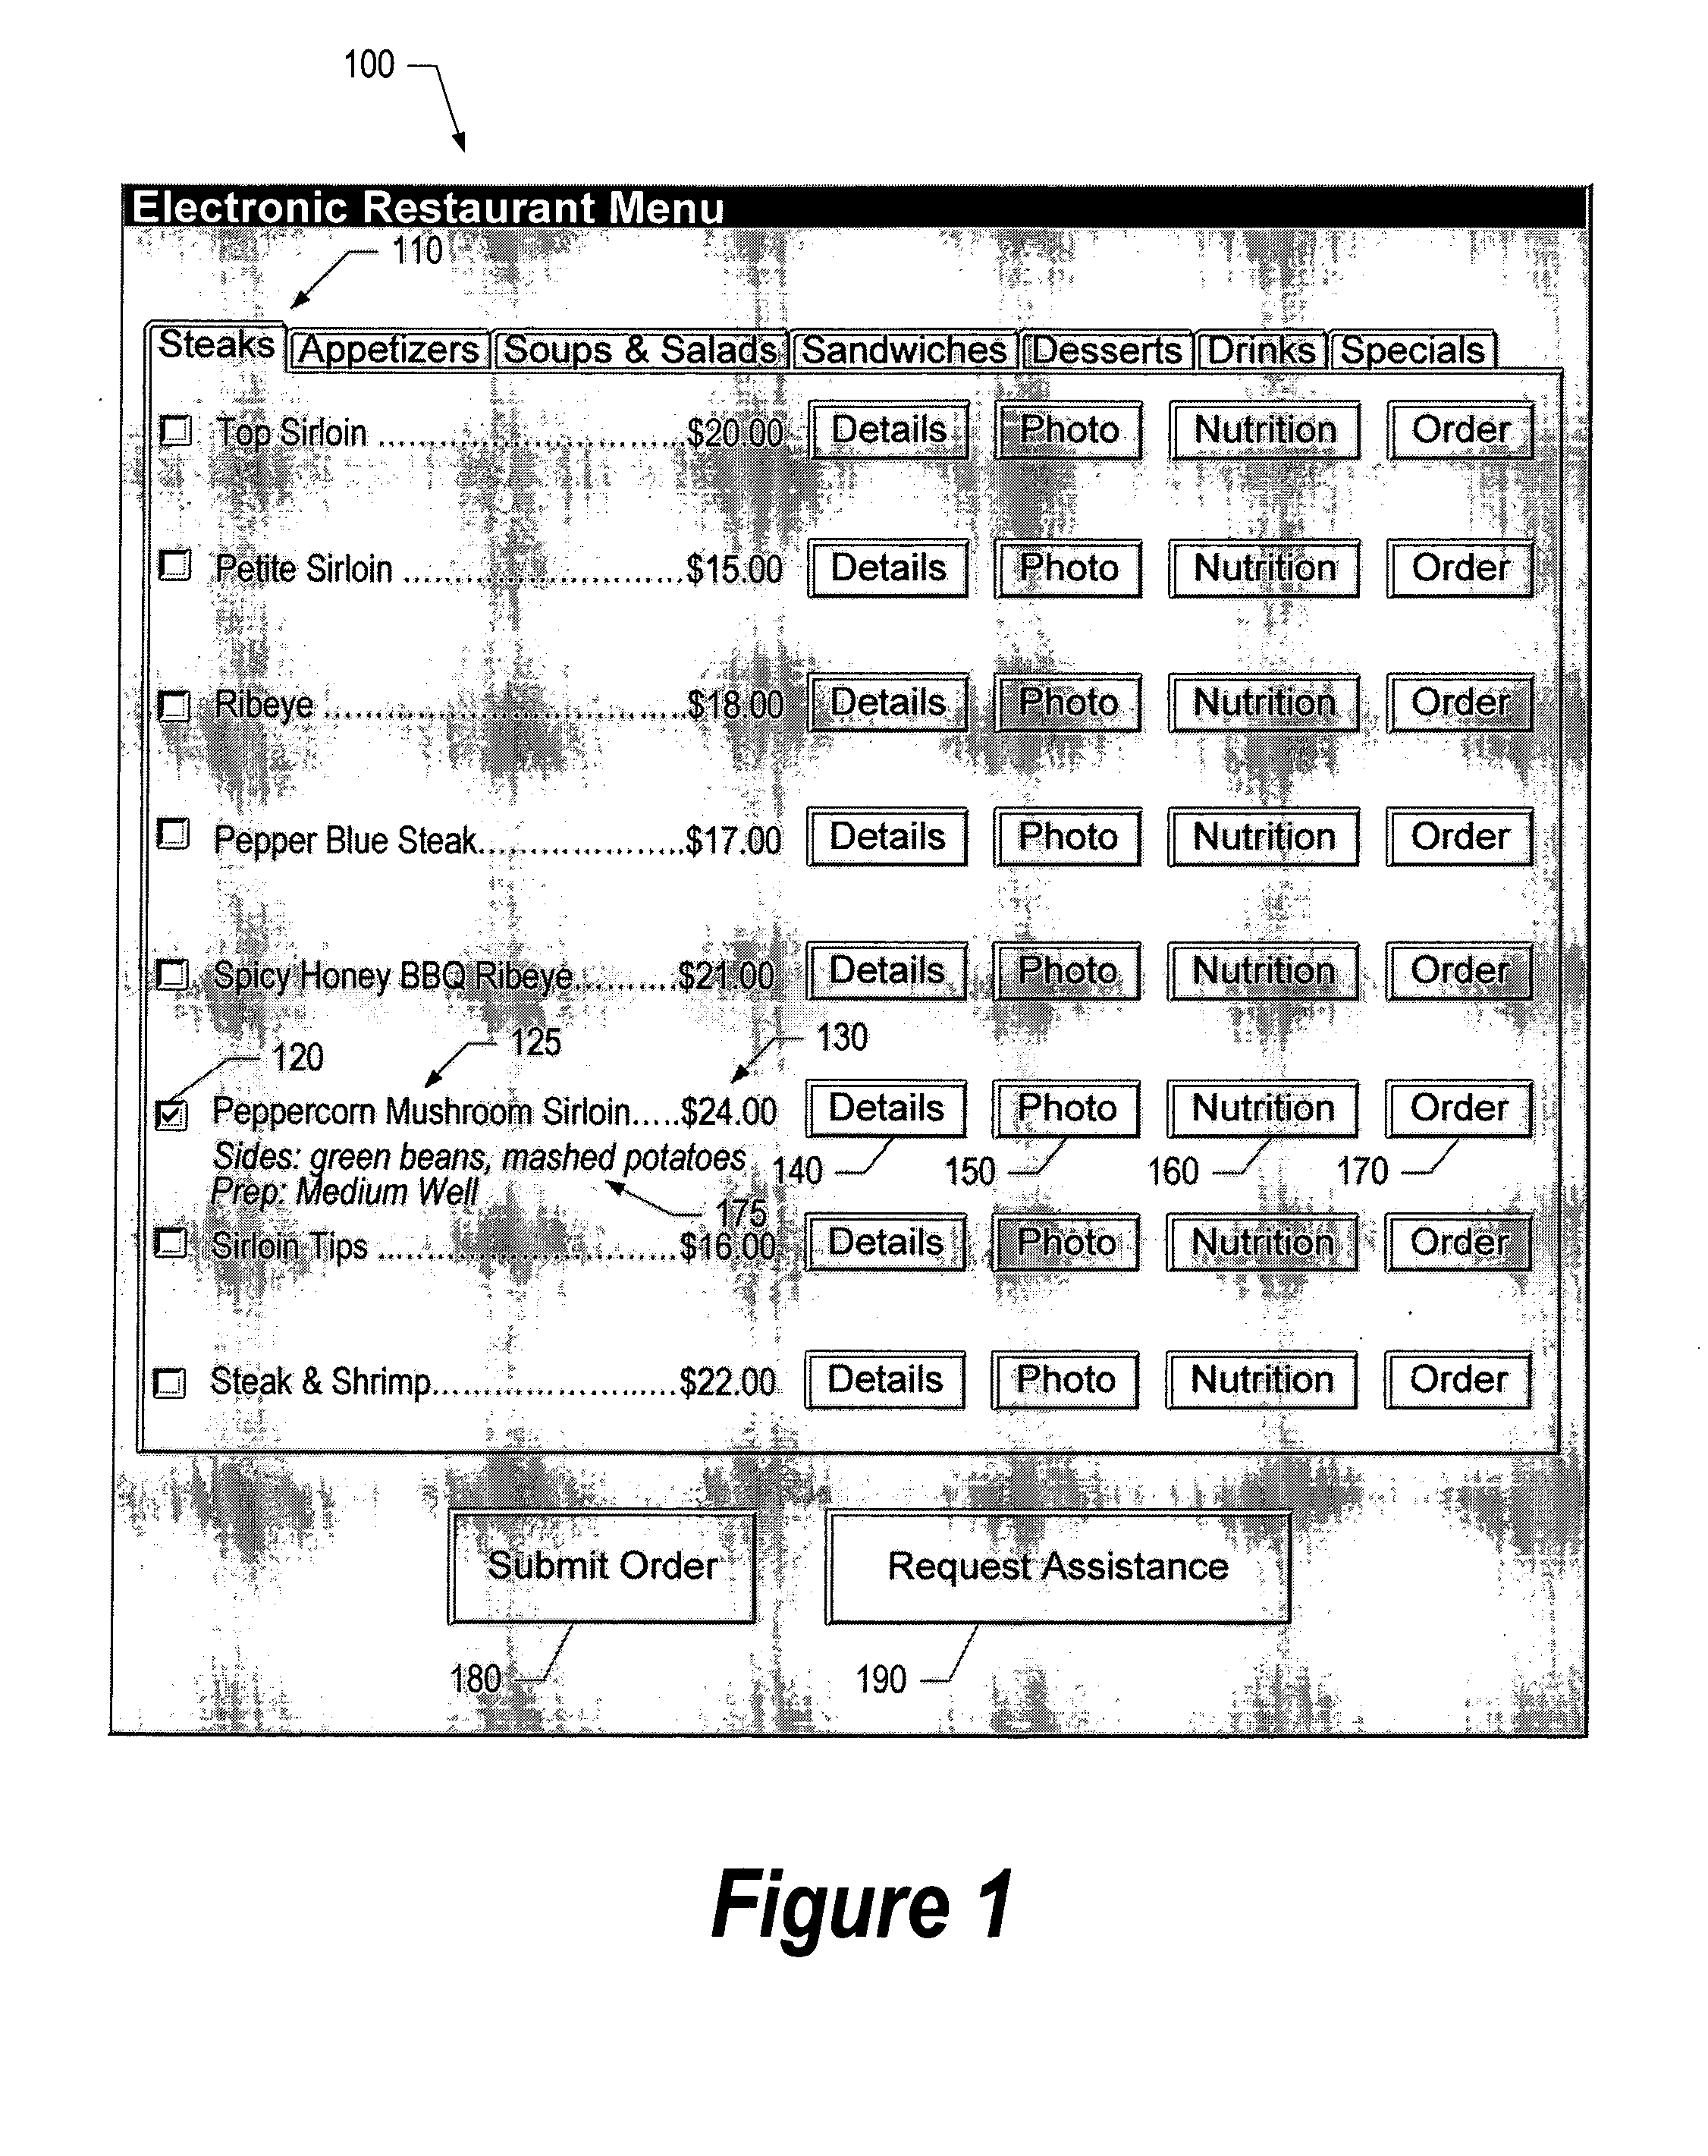 System and method for restaurant electronic menu